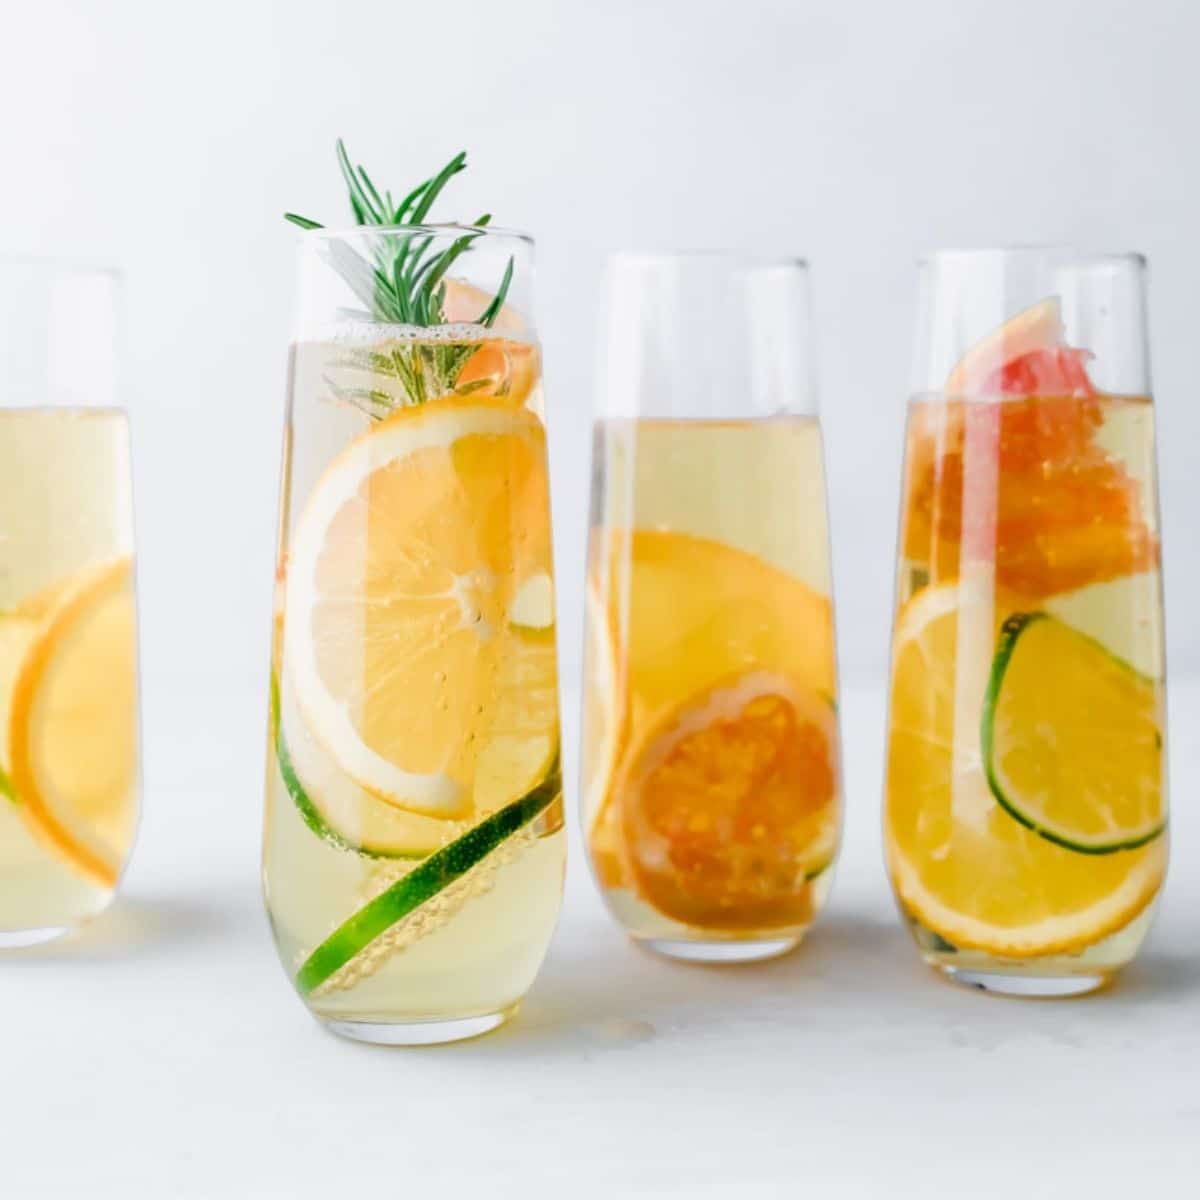 4 glasses of apple drink with citrus slices in it